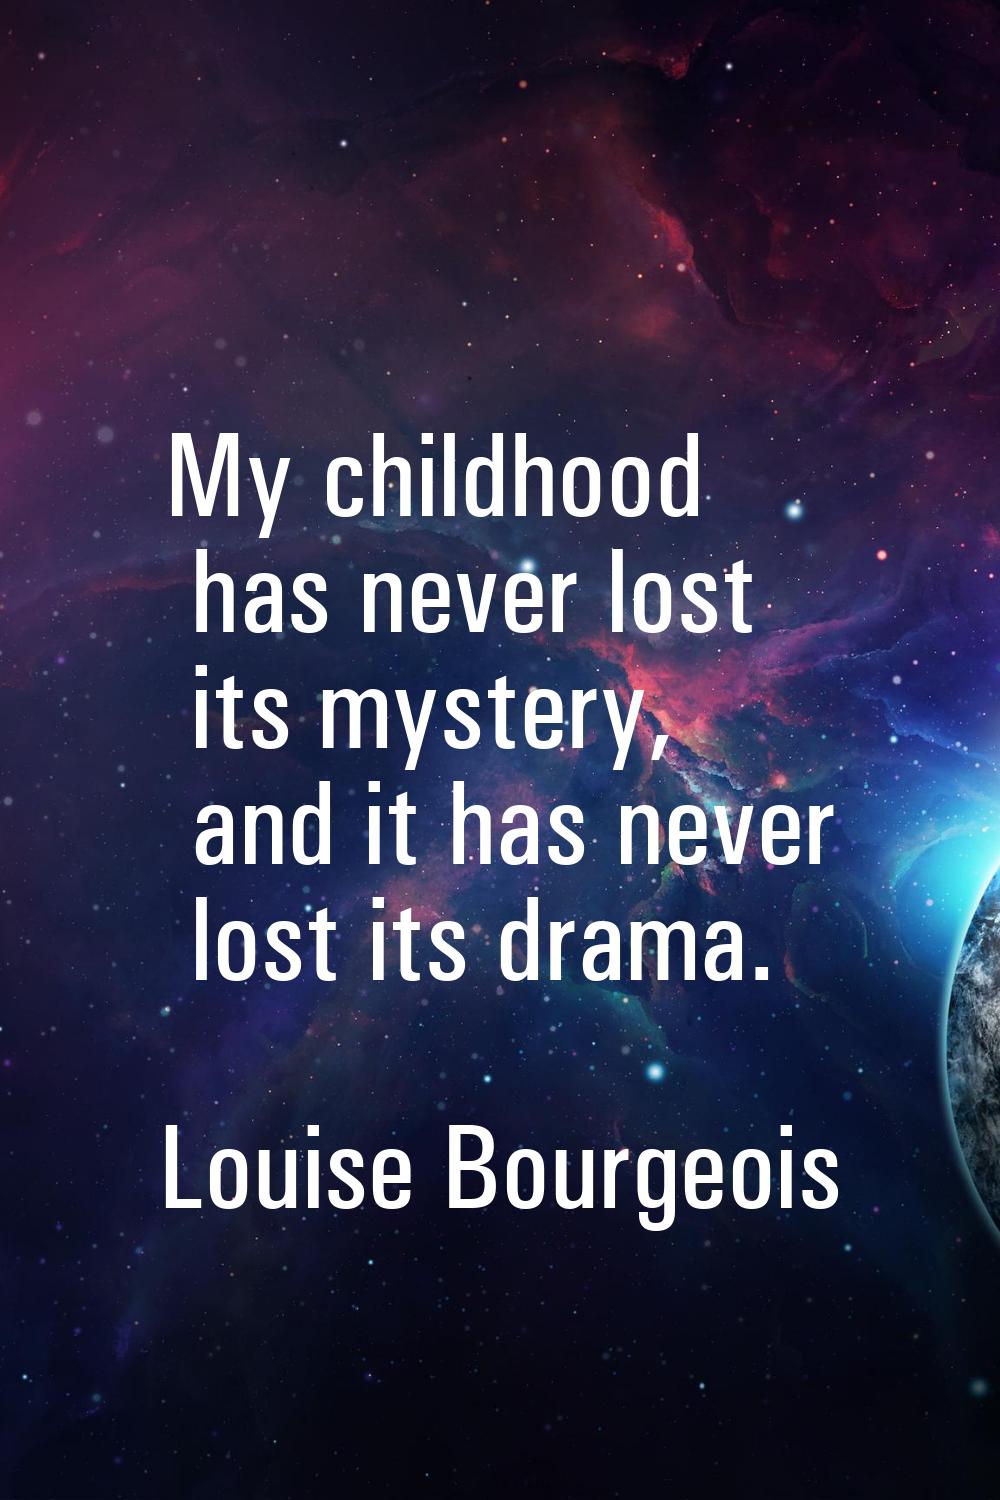 My childhood has never lost its mystery, and it has never lost its drama.